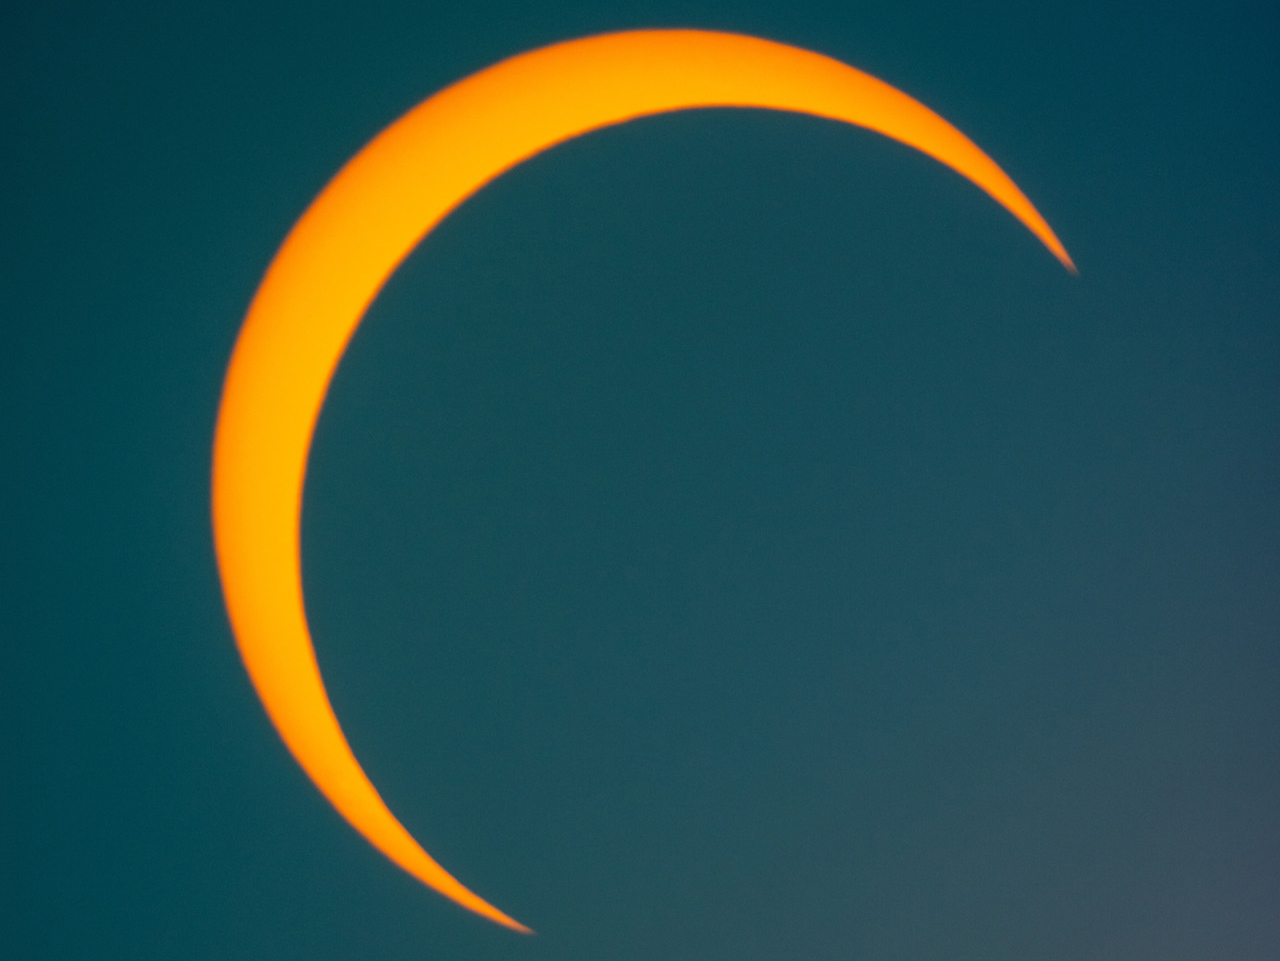 The total solar eclipse is expected to last over 4 minutes as it tracks across the Texas sky on April 8. Not only will the sky darken, but many animals will sense changes in temperature and wind speed. (Photo: Michael Miller/Texas A&M AgriLife)